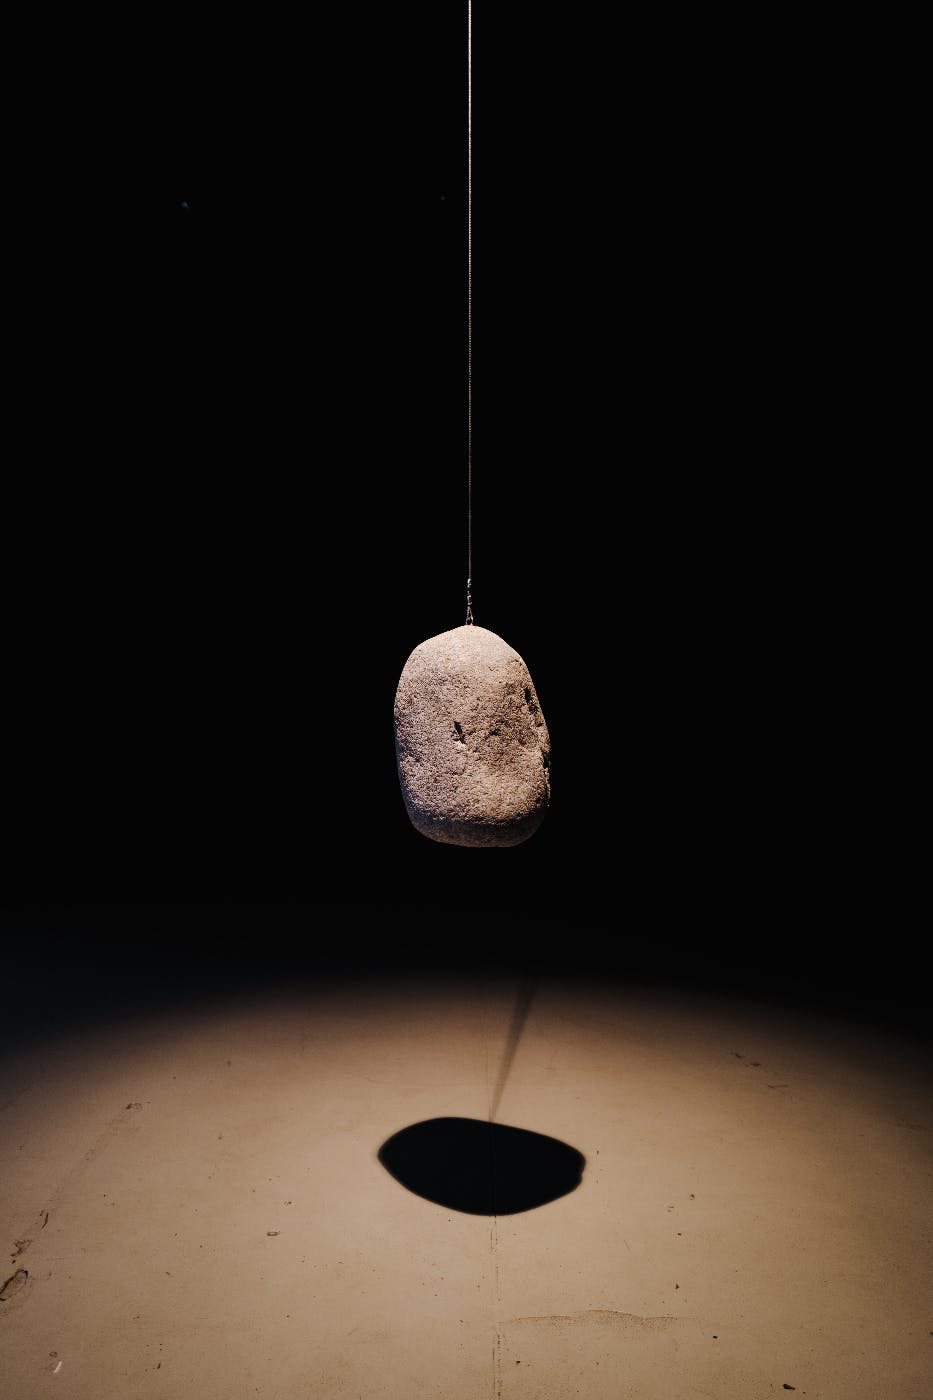 A stone suspended from a wire